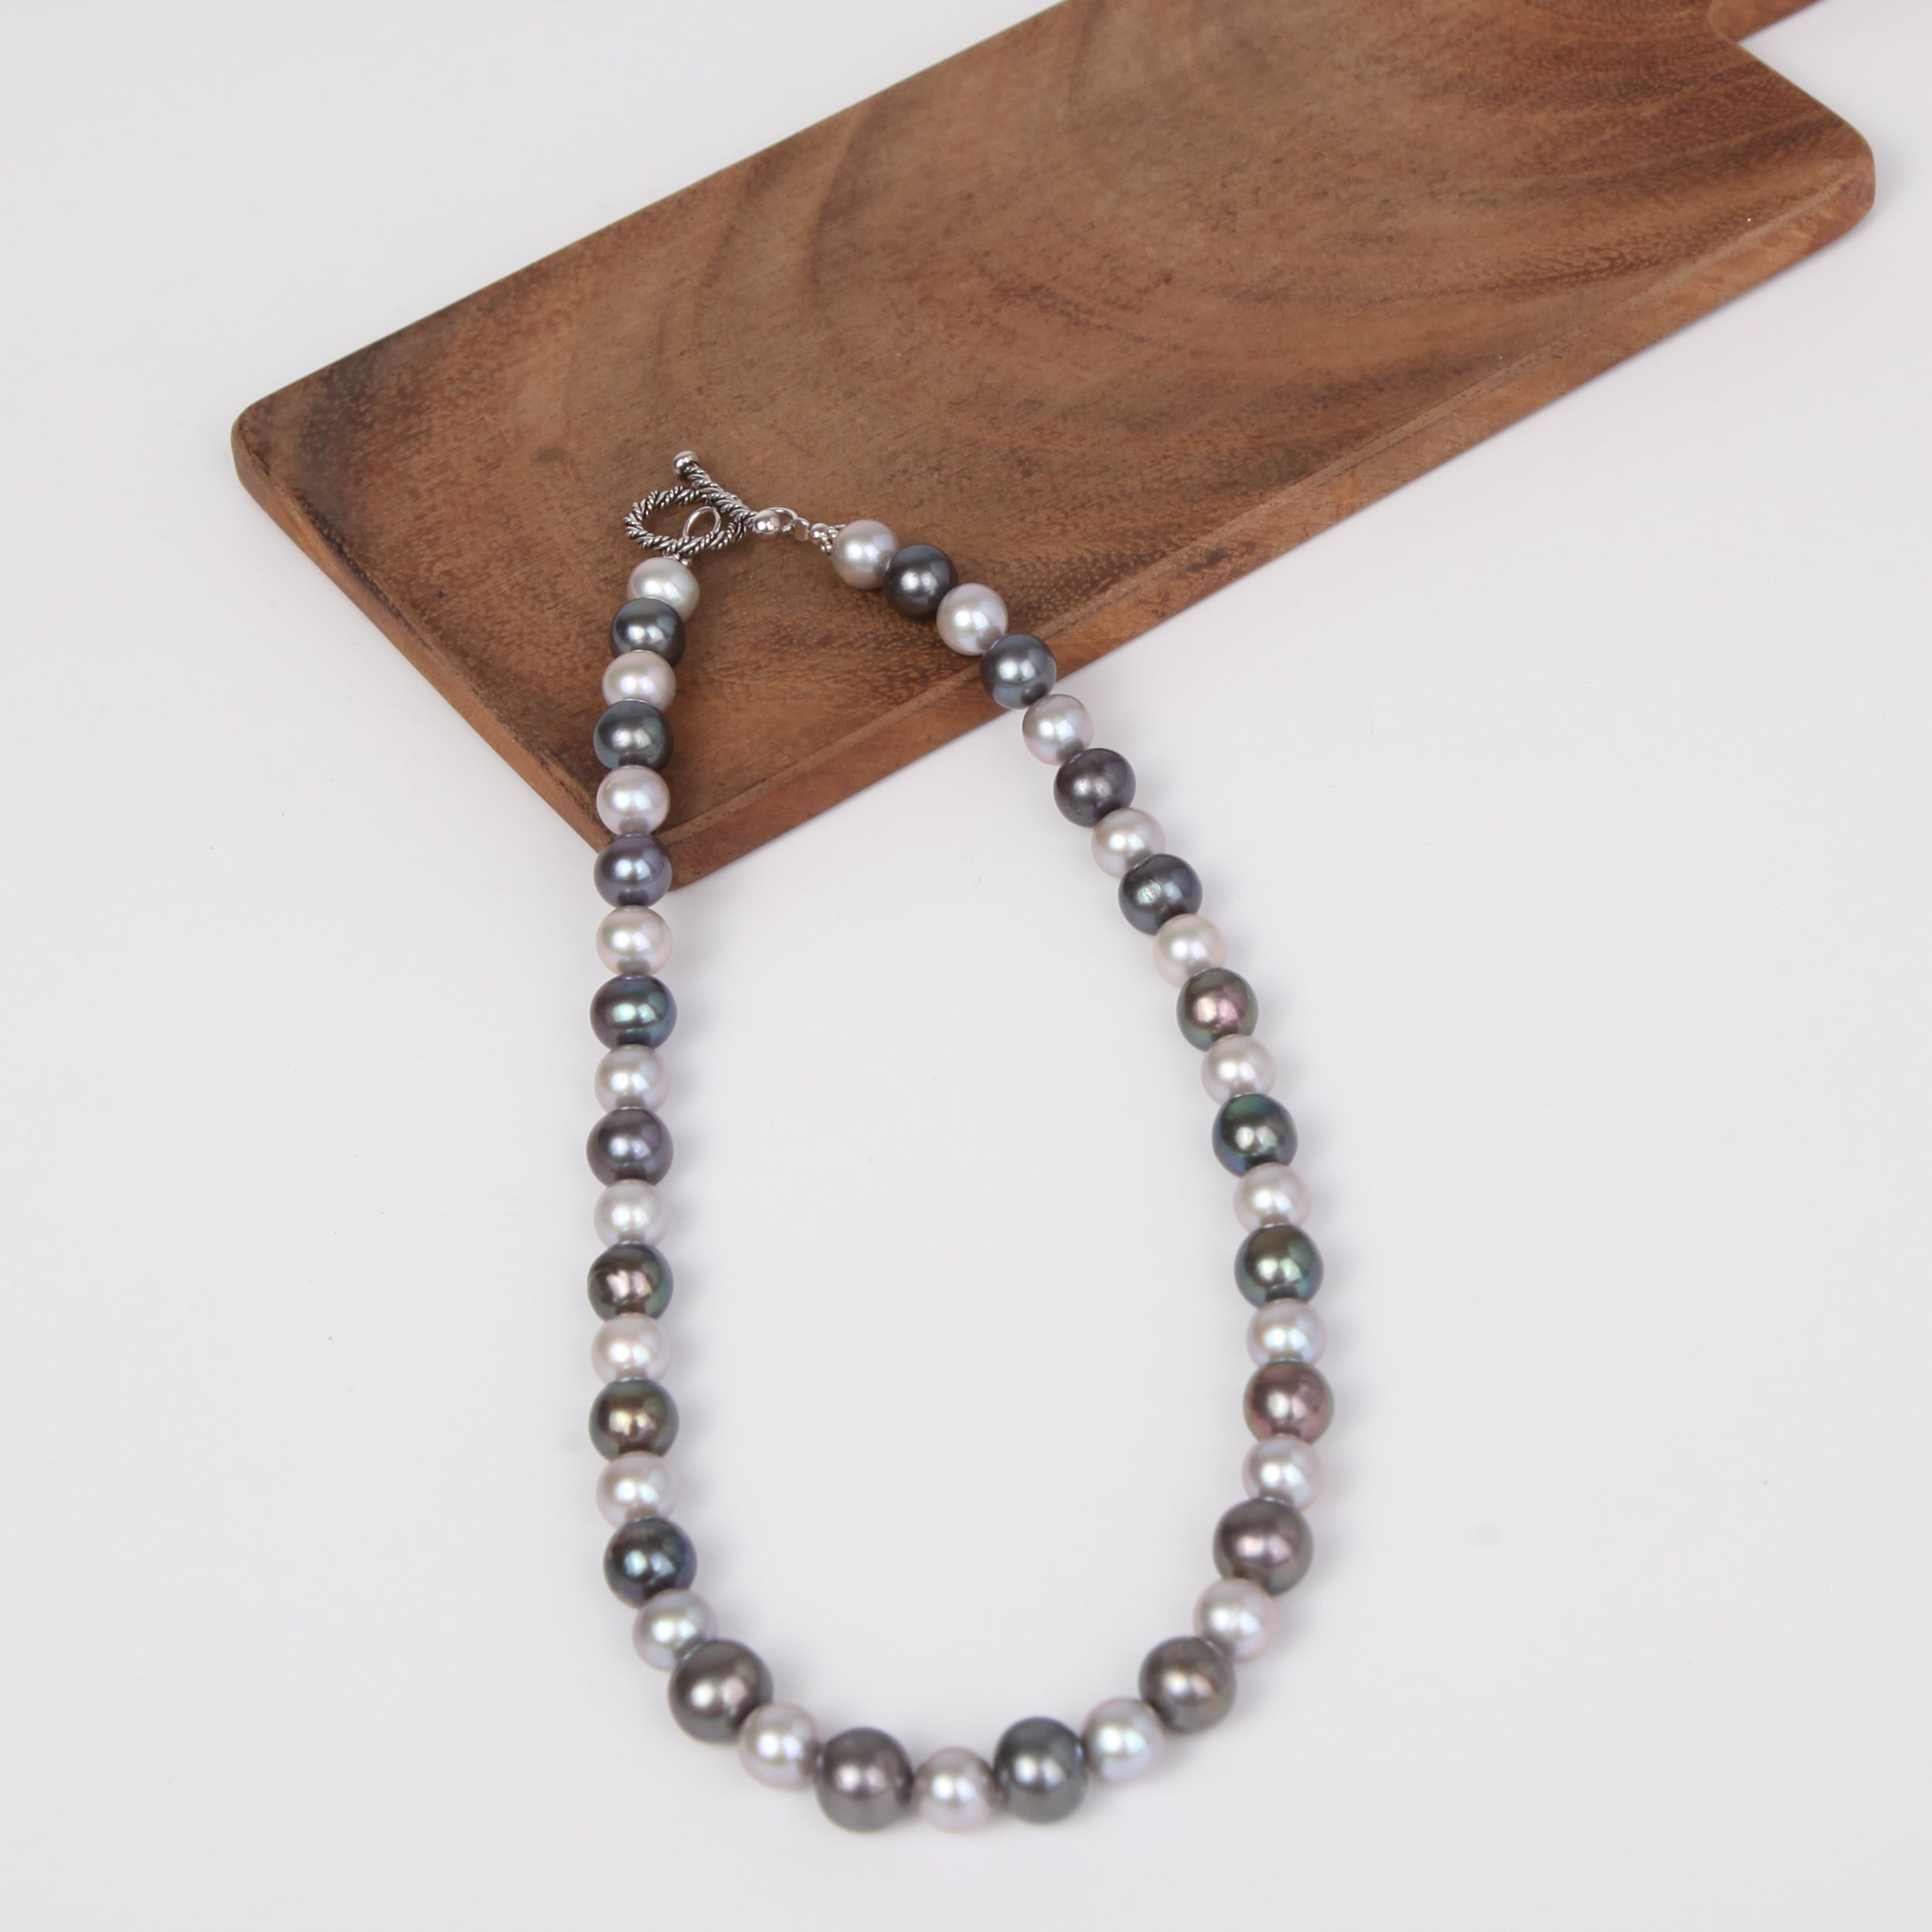 Dark Two Tone Fresh Water Pearl Necklace with Sterling Silver